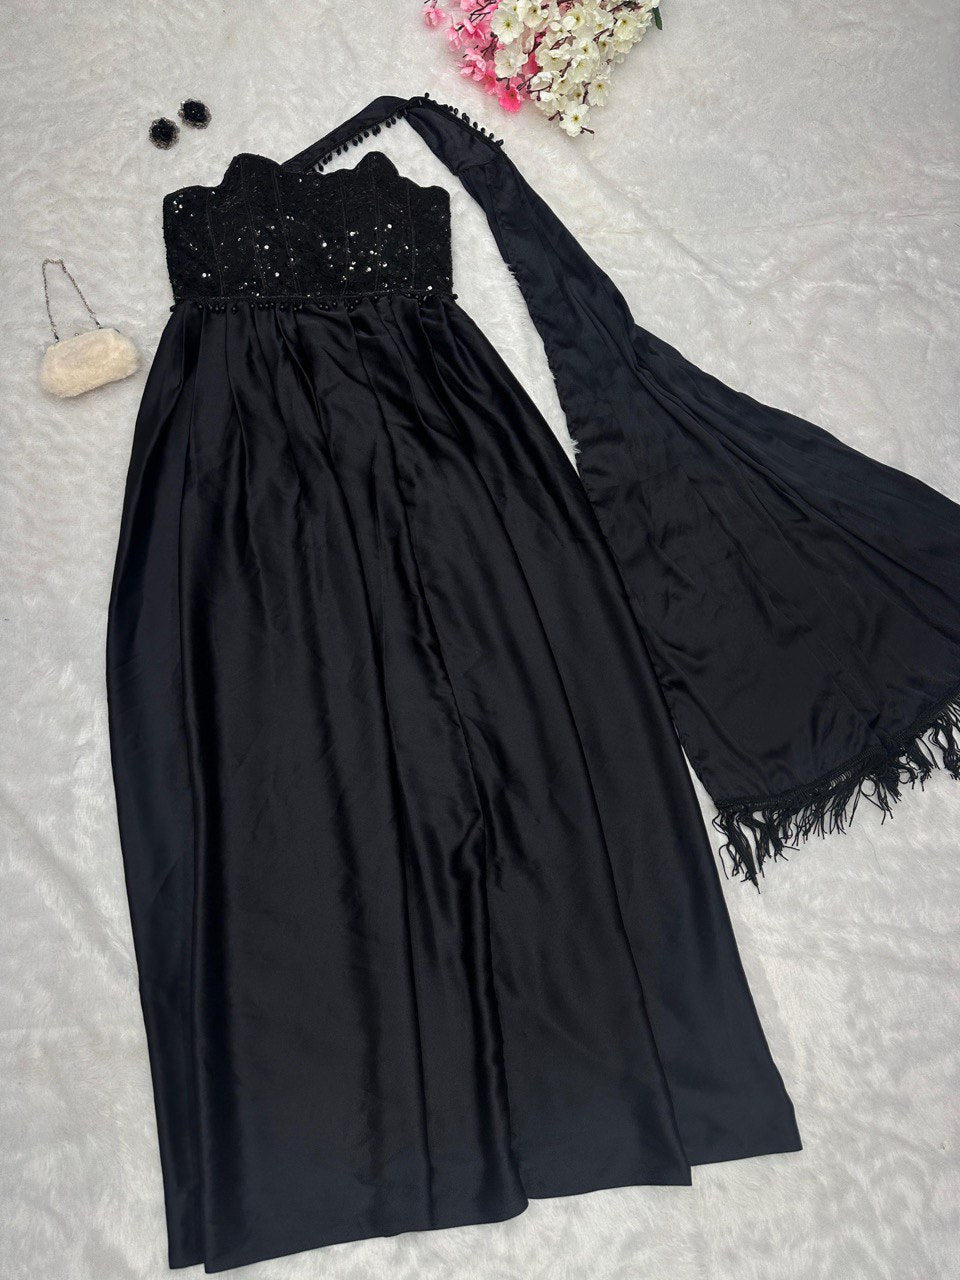 "Black Satin Silk Gown with Sequin & Handwork Lace Detailing - Elegant Western Wear for Special Occasions"